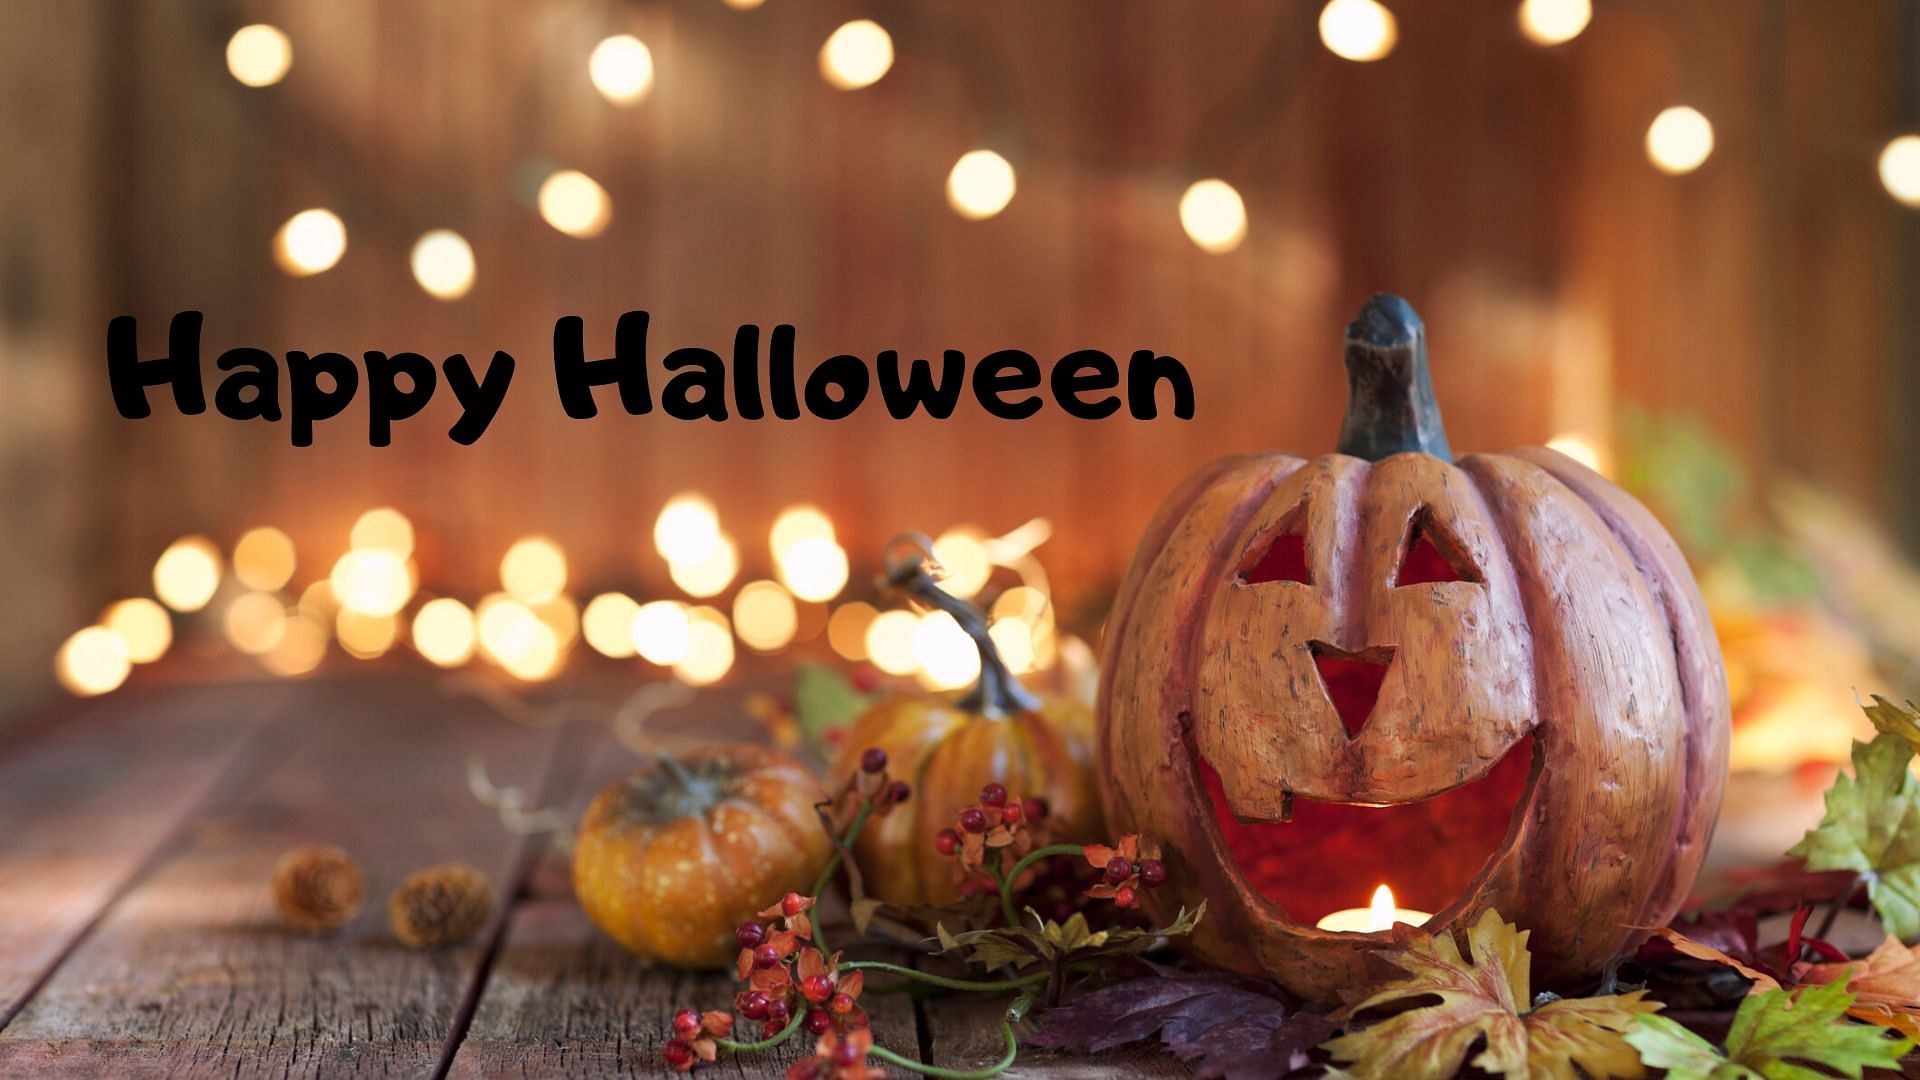 Halloween 2019 Spooky Wishes, Images with Quotes, Cards, Greetings For